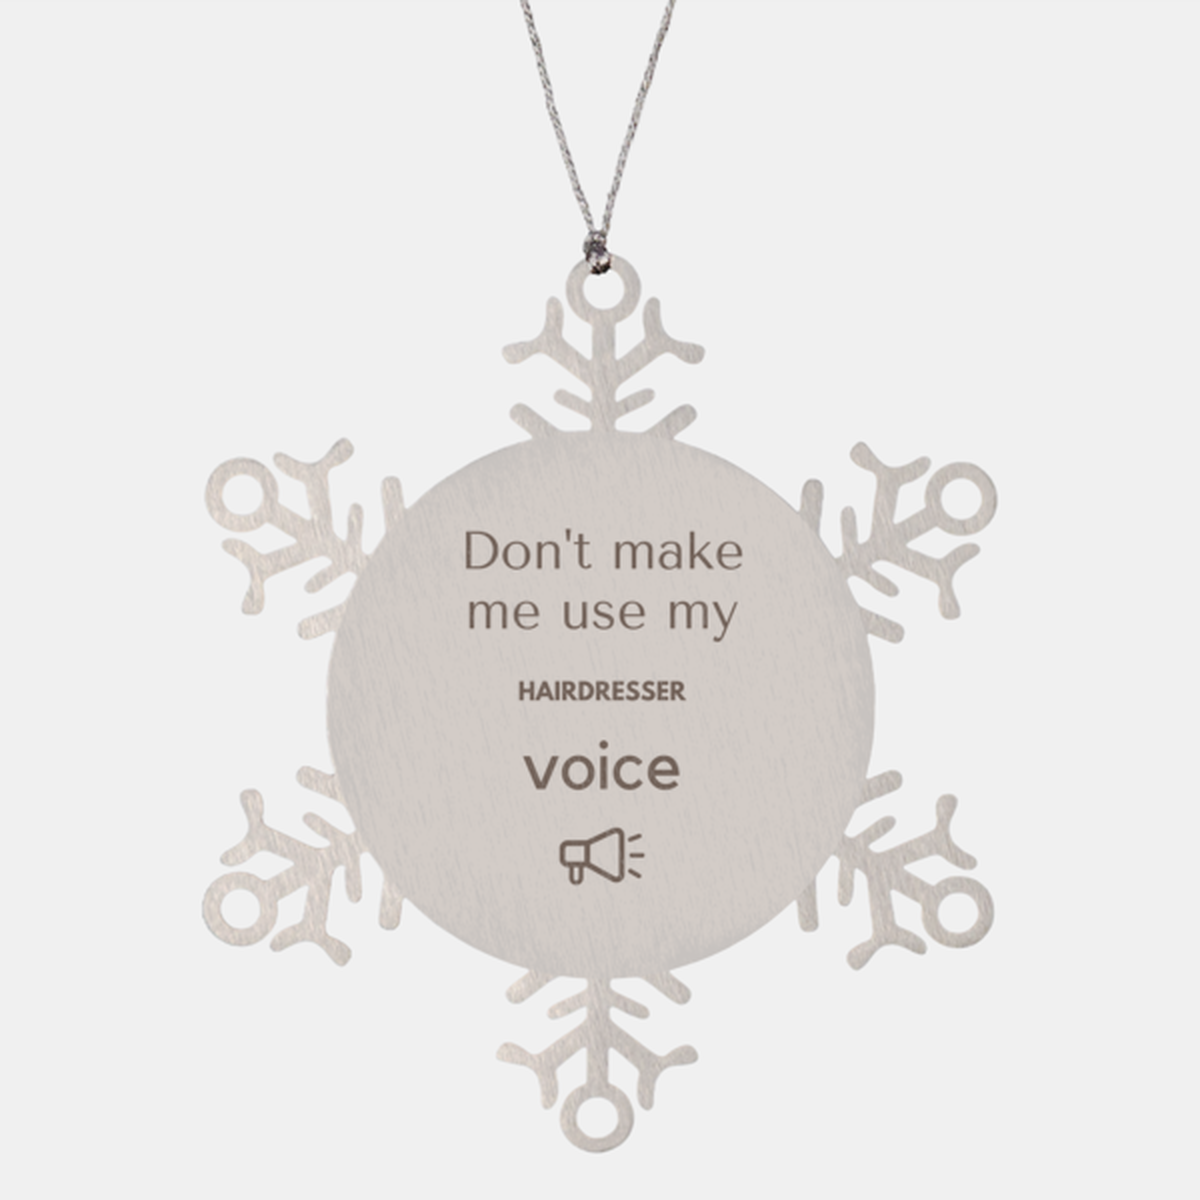 Don't make me use my Hairdresser voice, Sarcasm Hairdresser Ornament Gifts, Christmas Hairdresser Snowflake Ornament Unique Gifts For Hairdresser Coworkers, Men, Women, Colleague, Friends